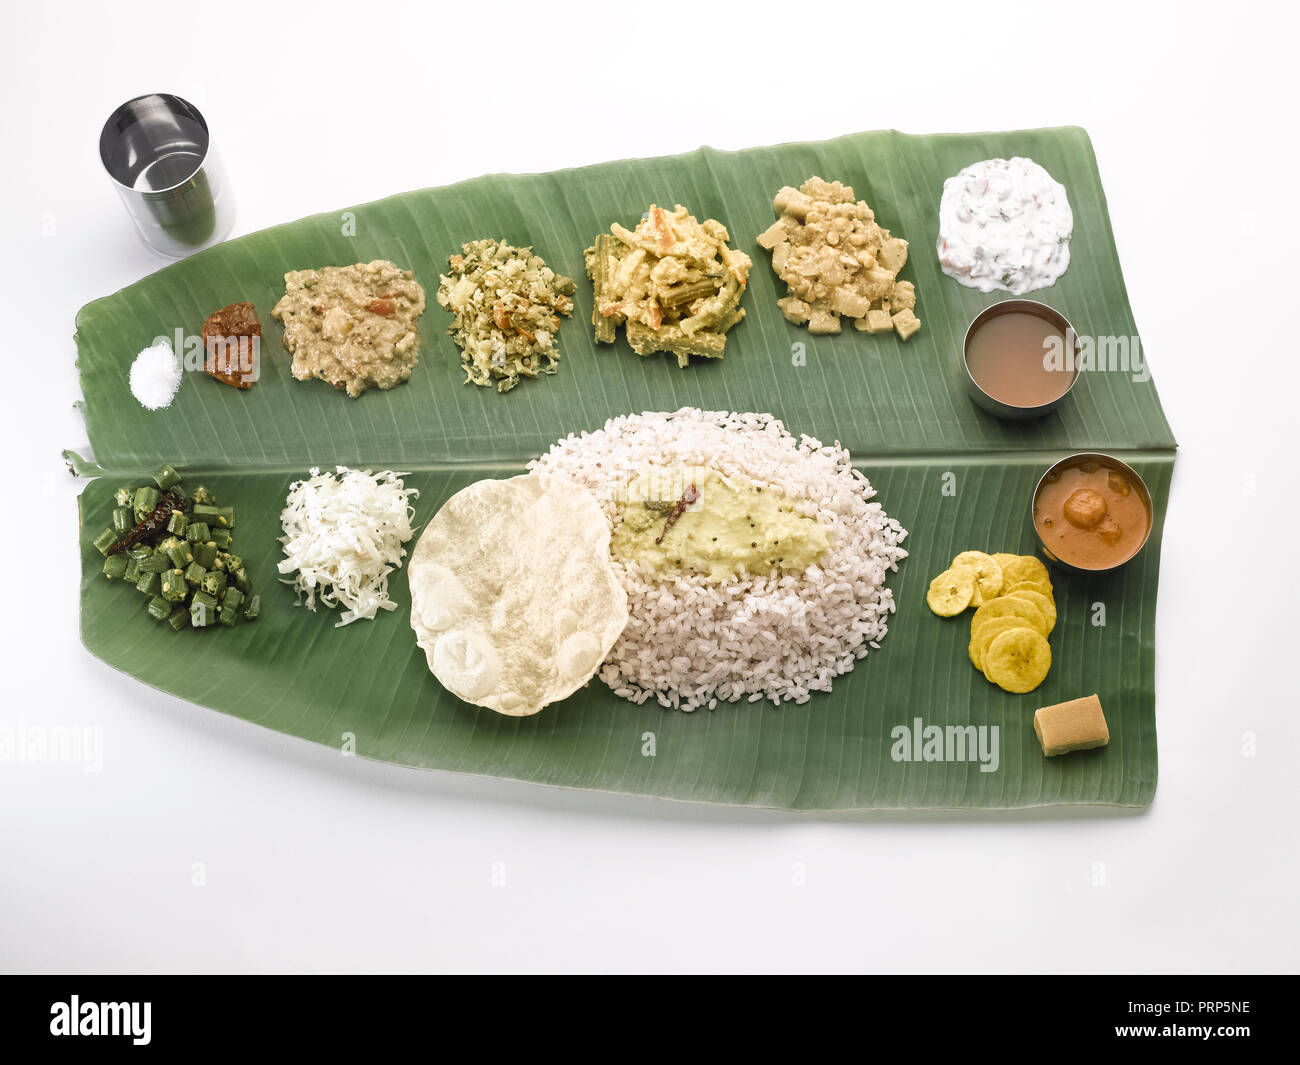 Tamil lunch on a banana leaf Stock Photo